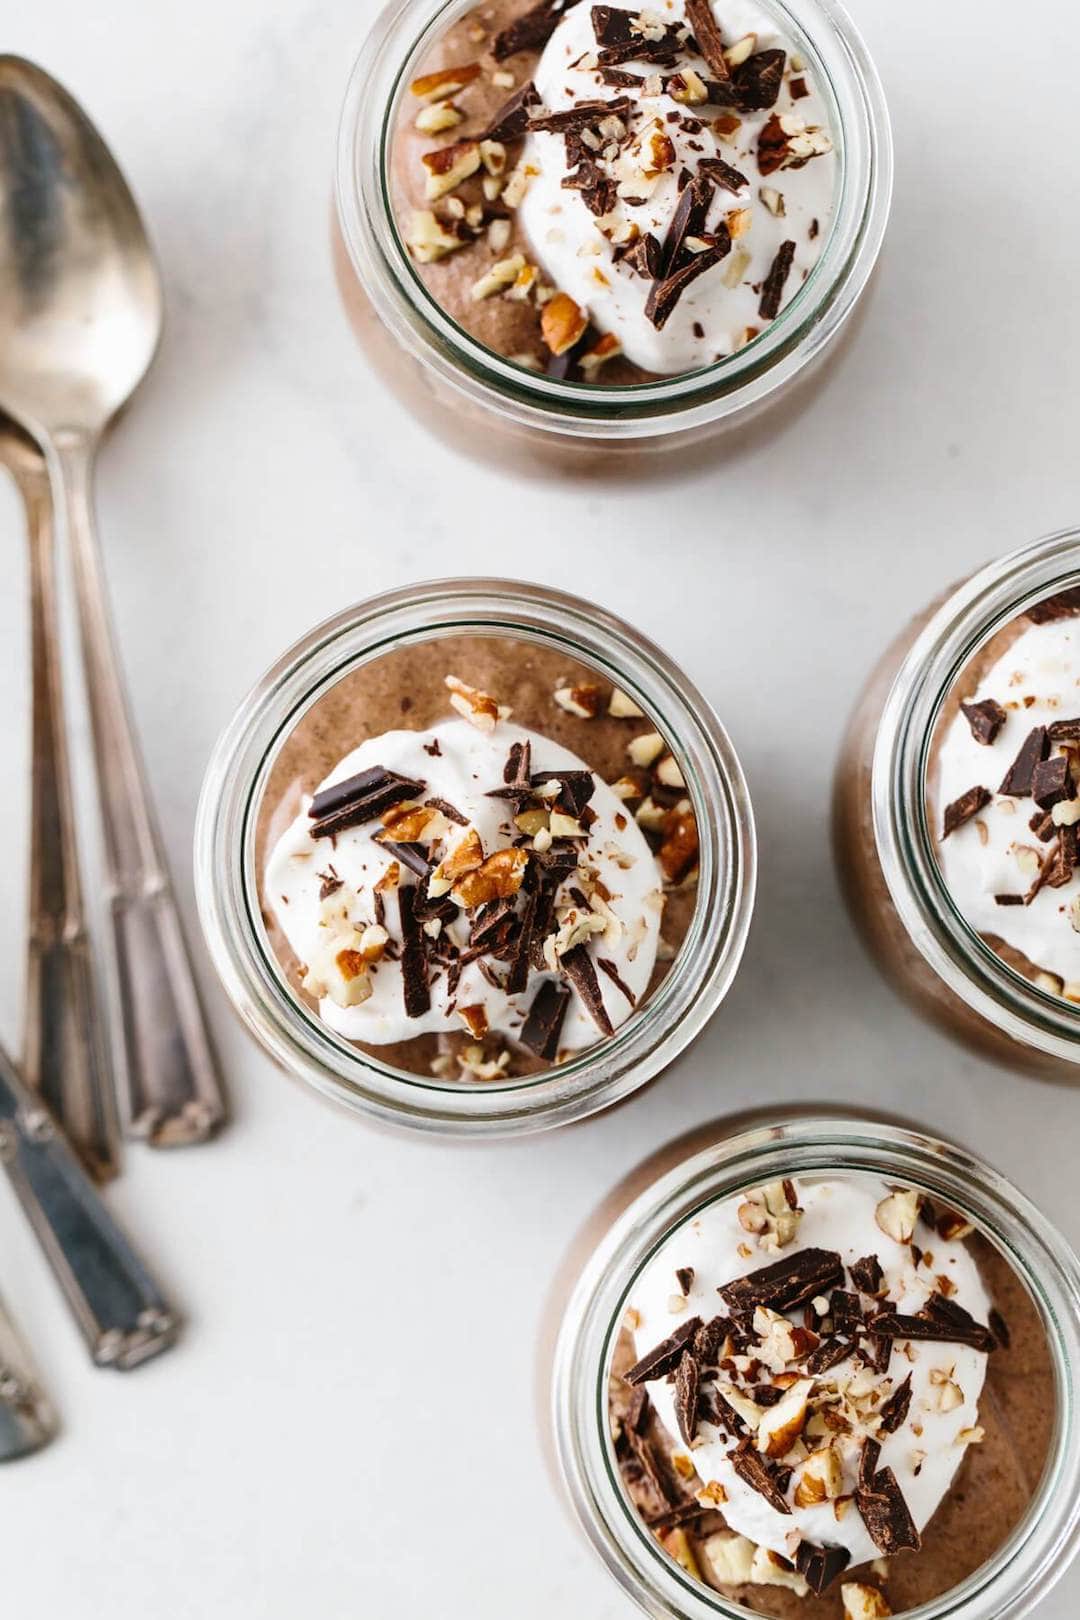 Chocolate Chia Mousse - 18 Delicious Low Fodmap Snacks